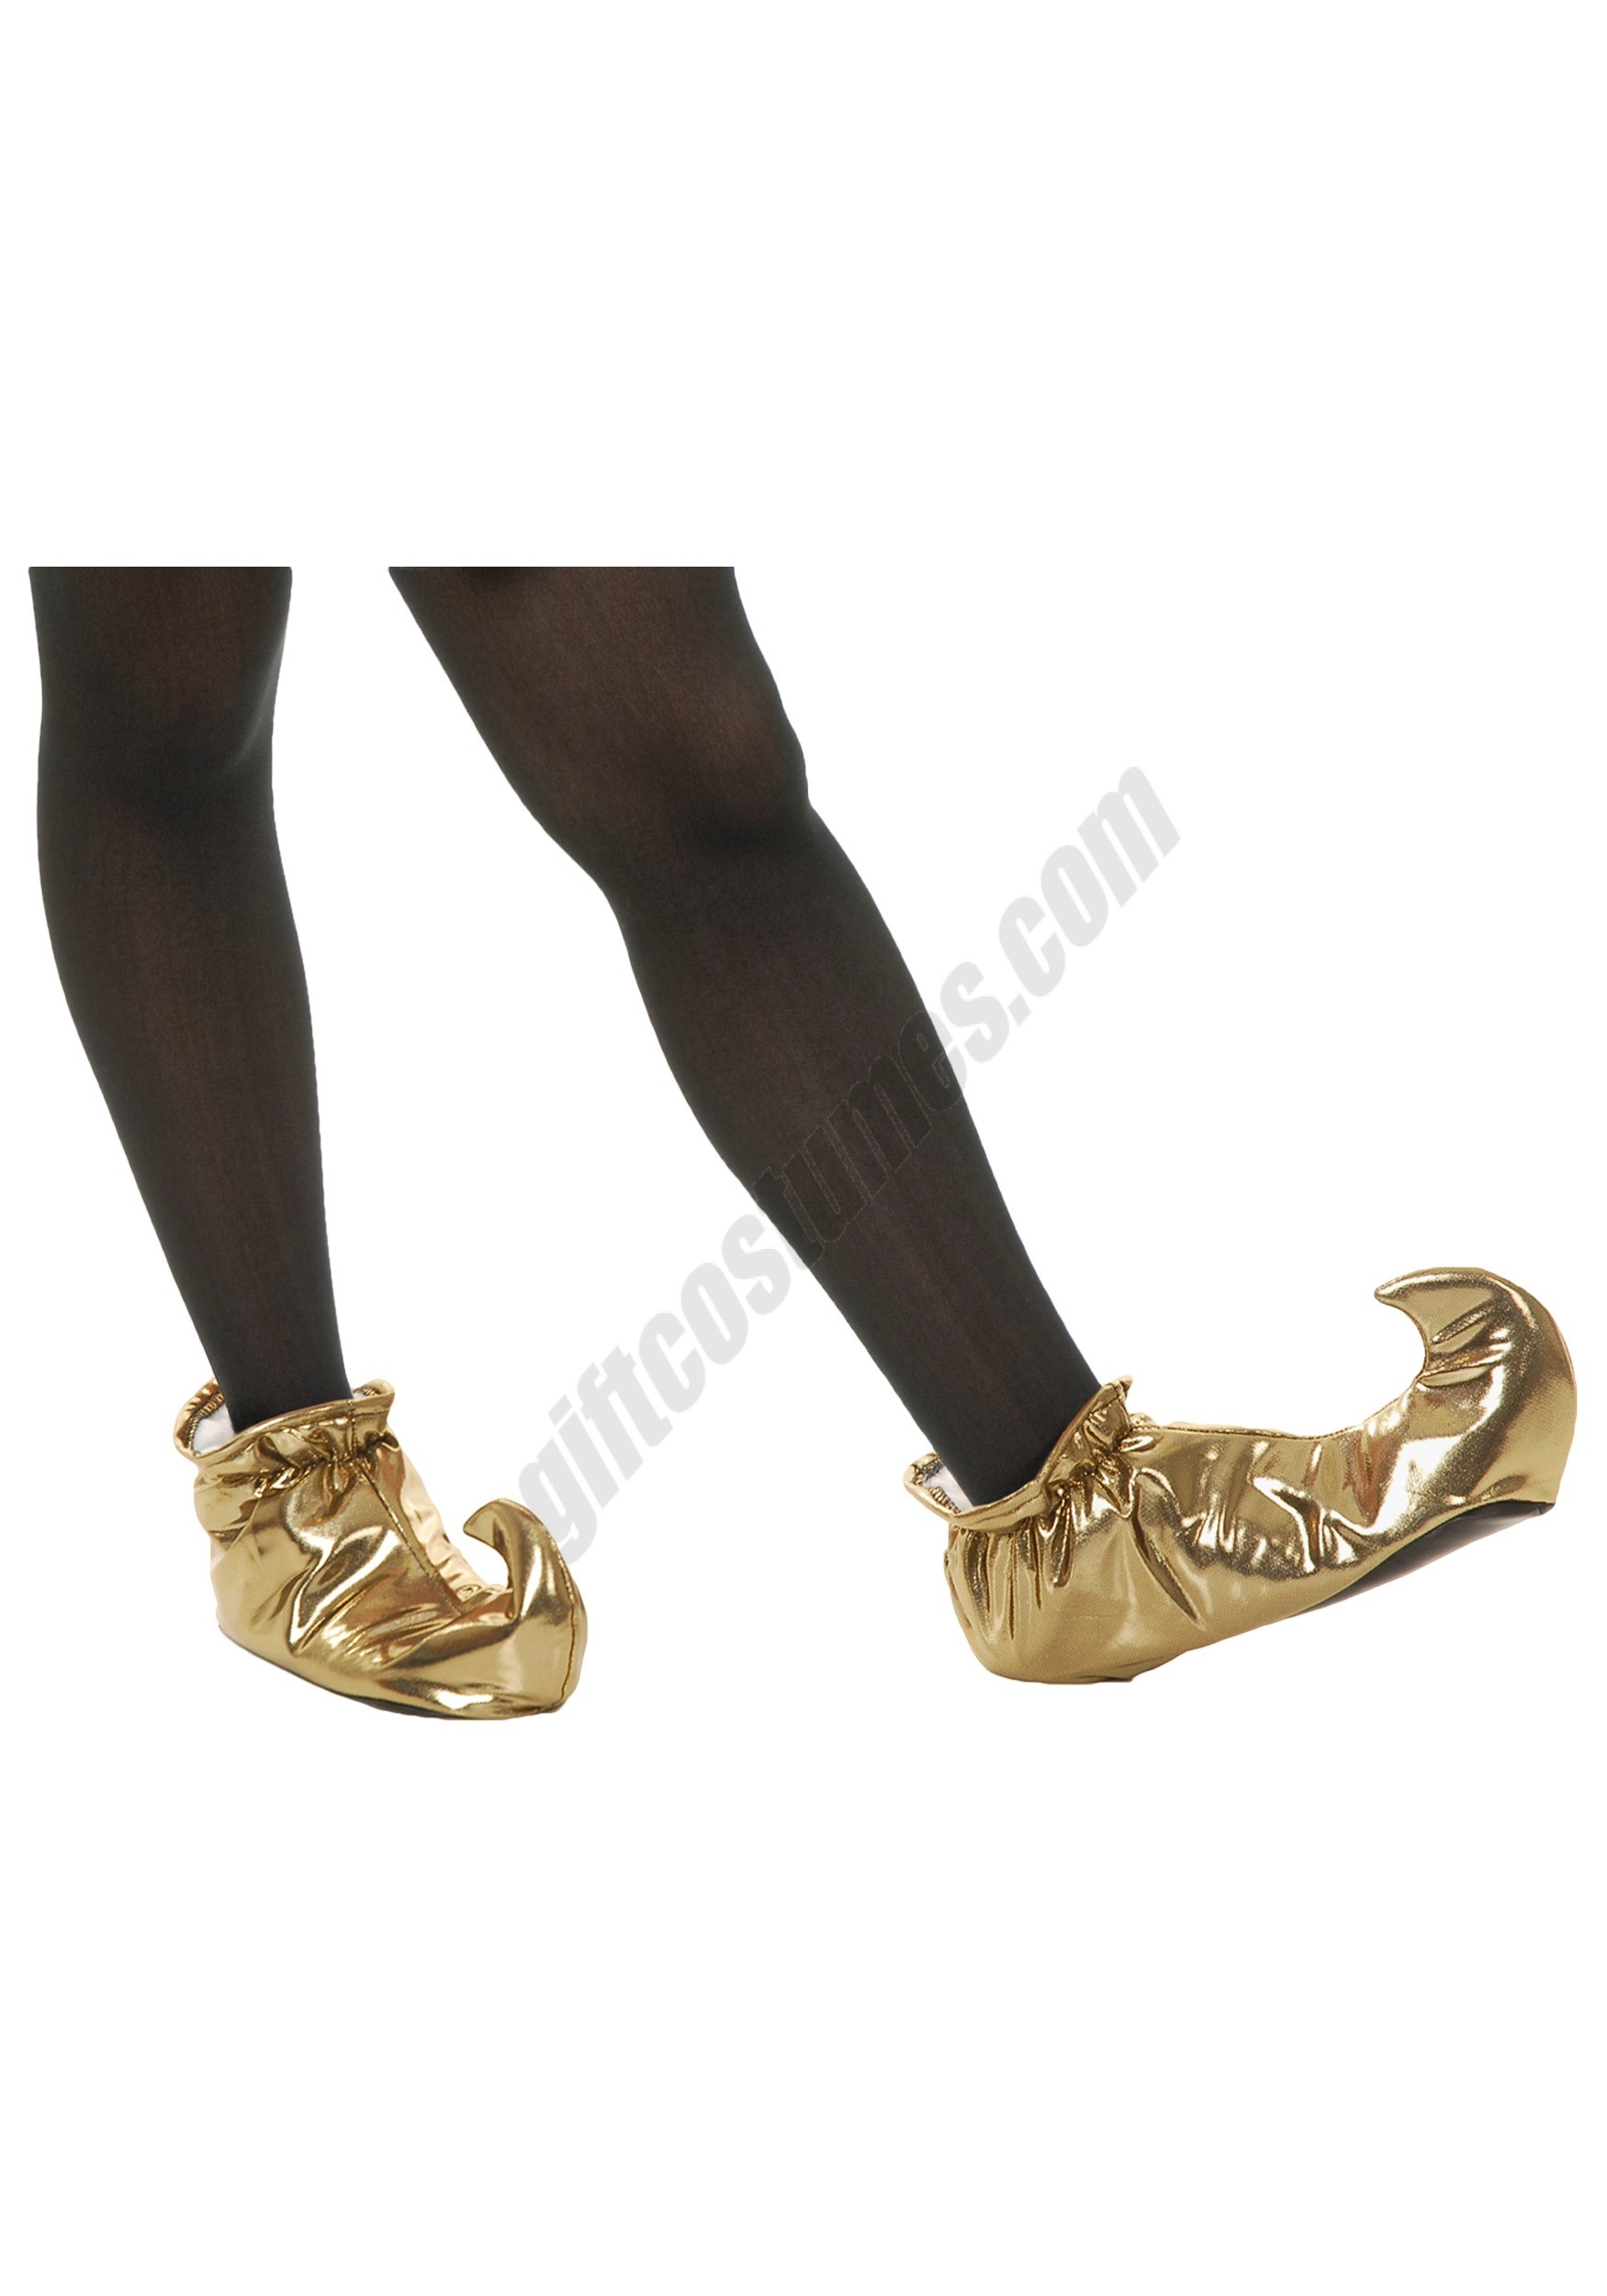 Gold Genie Shoes Promotions - Gold Genie Shoes Promotions